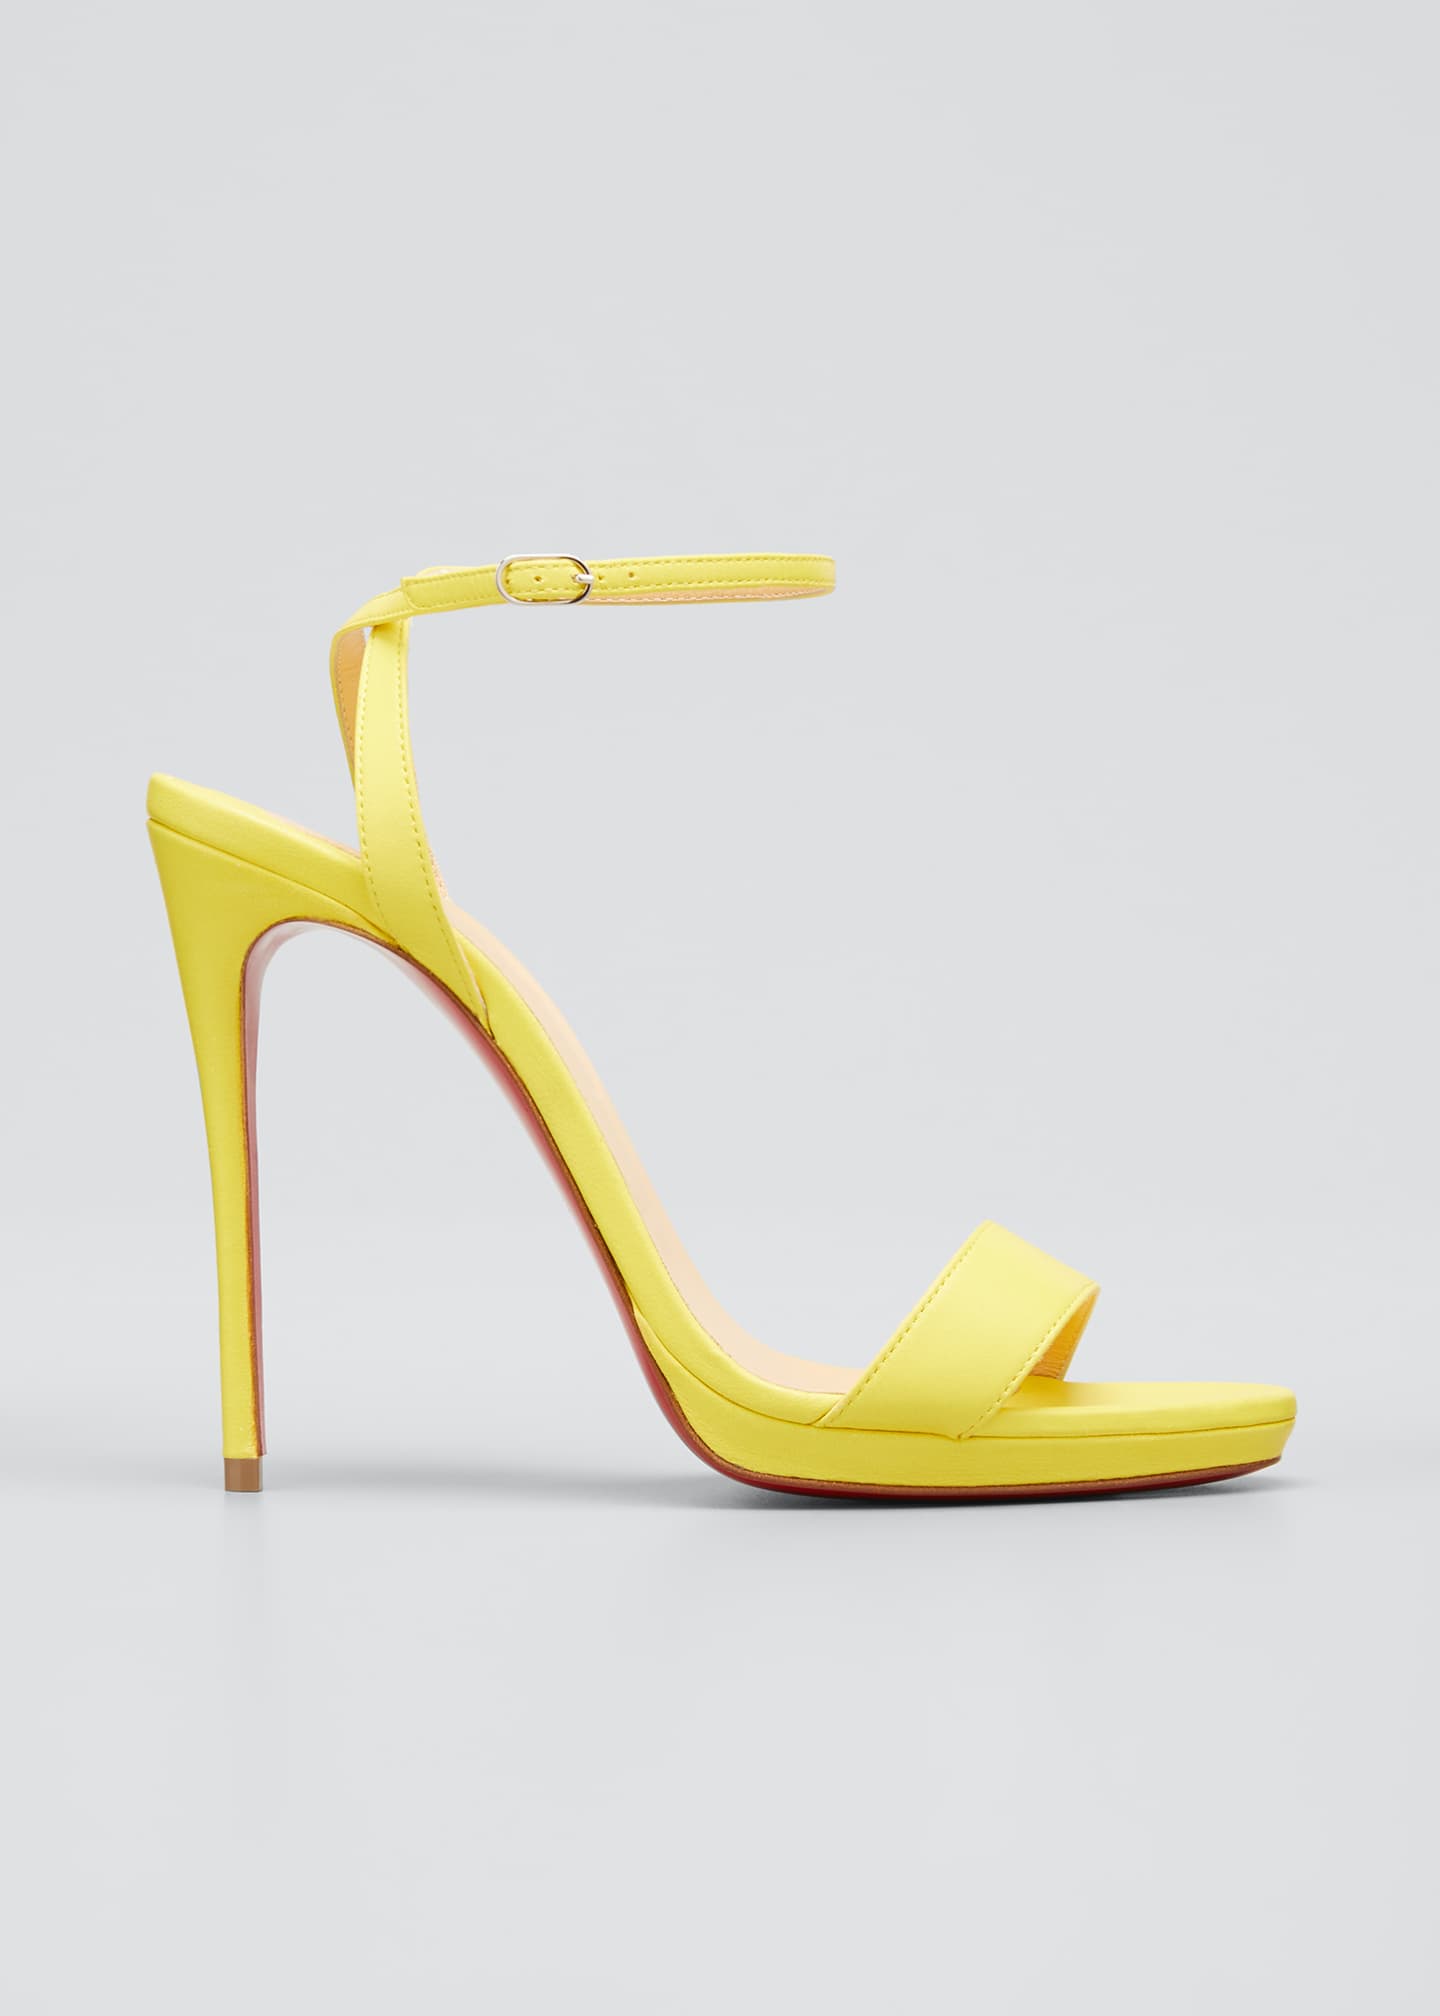 Christian Louboutin Loubi Queen Red Sole Ankle-Wrap Sandals - Bergdorf ...